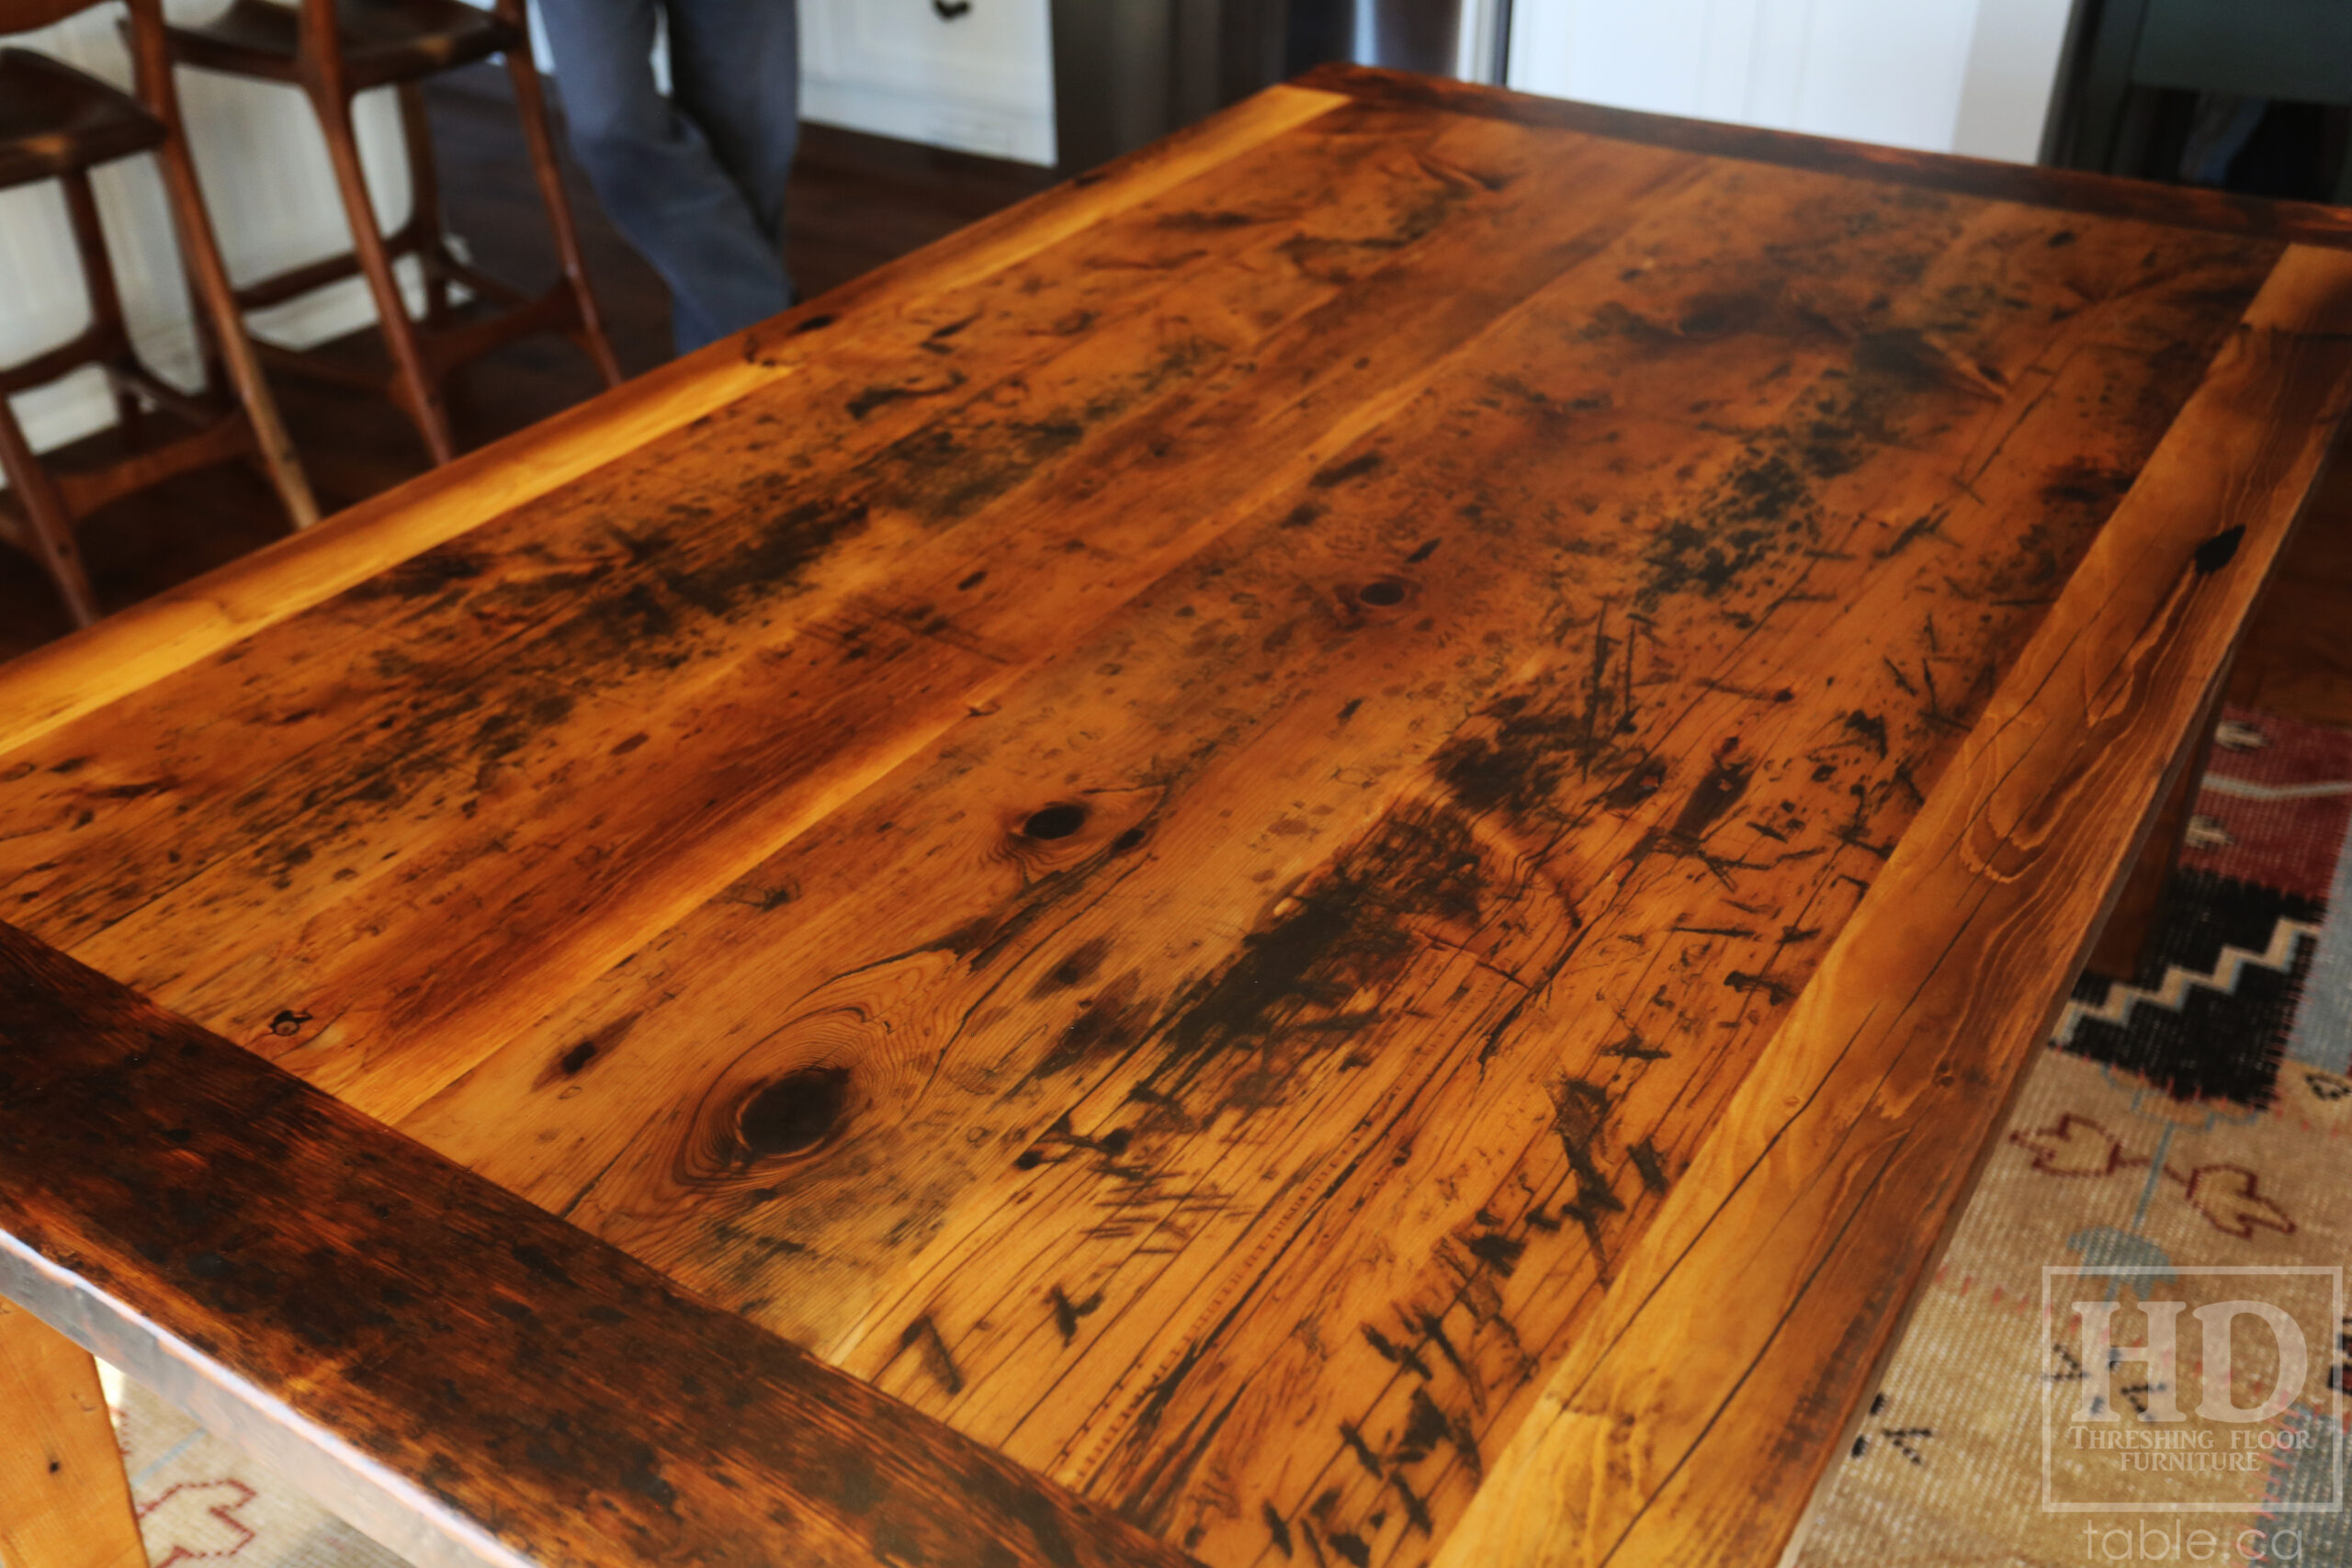 6’ Ontario Barnwood Harvest Table we made for a Dundas, Ontario home – 42” wide – Tapered with a Notch Windbrace Beam Legs - Reclaimed Hemlock Threshing Floor Construction – Original distressing & edges maintained – Premium epoxy + satin polyurethane finish - www.table.ca